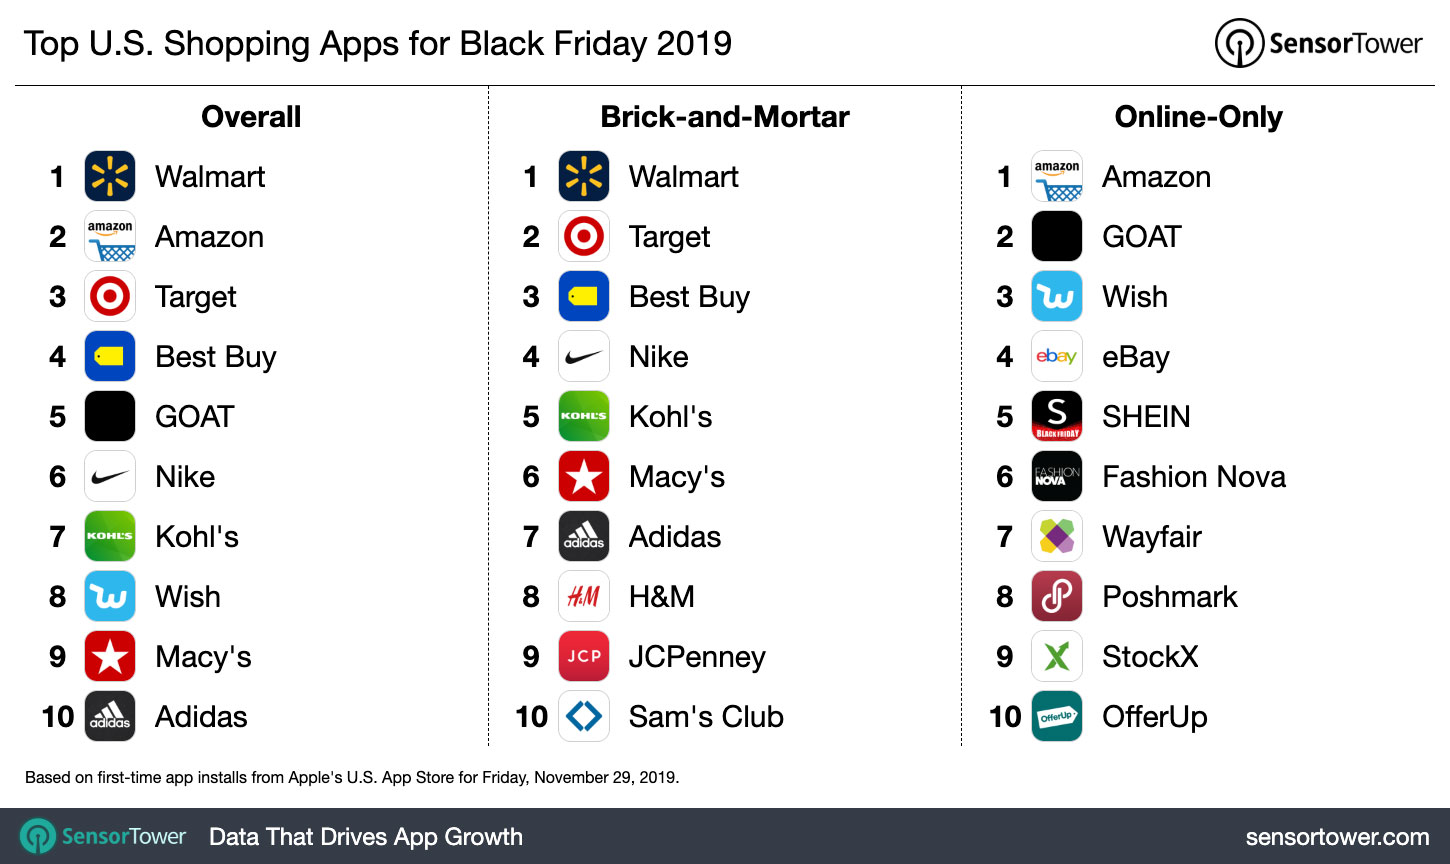 Top U.S. Shopping Apps for Black Friday 2019